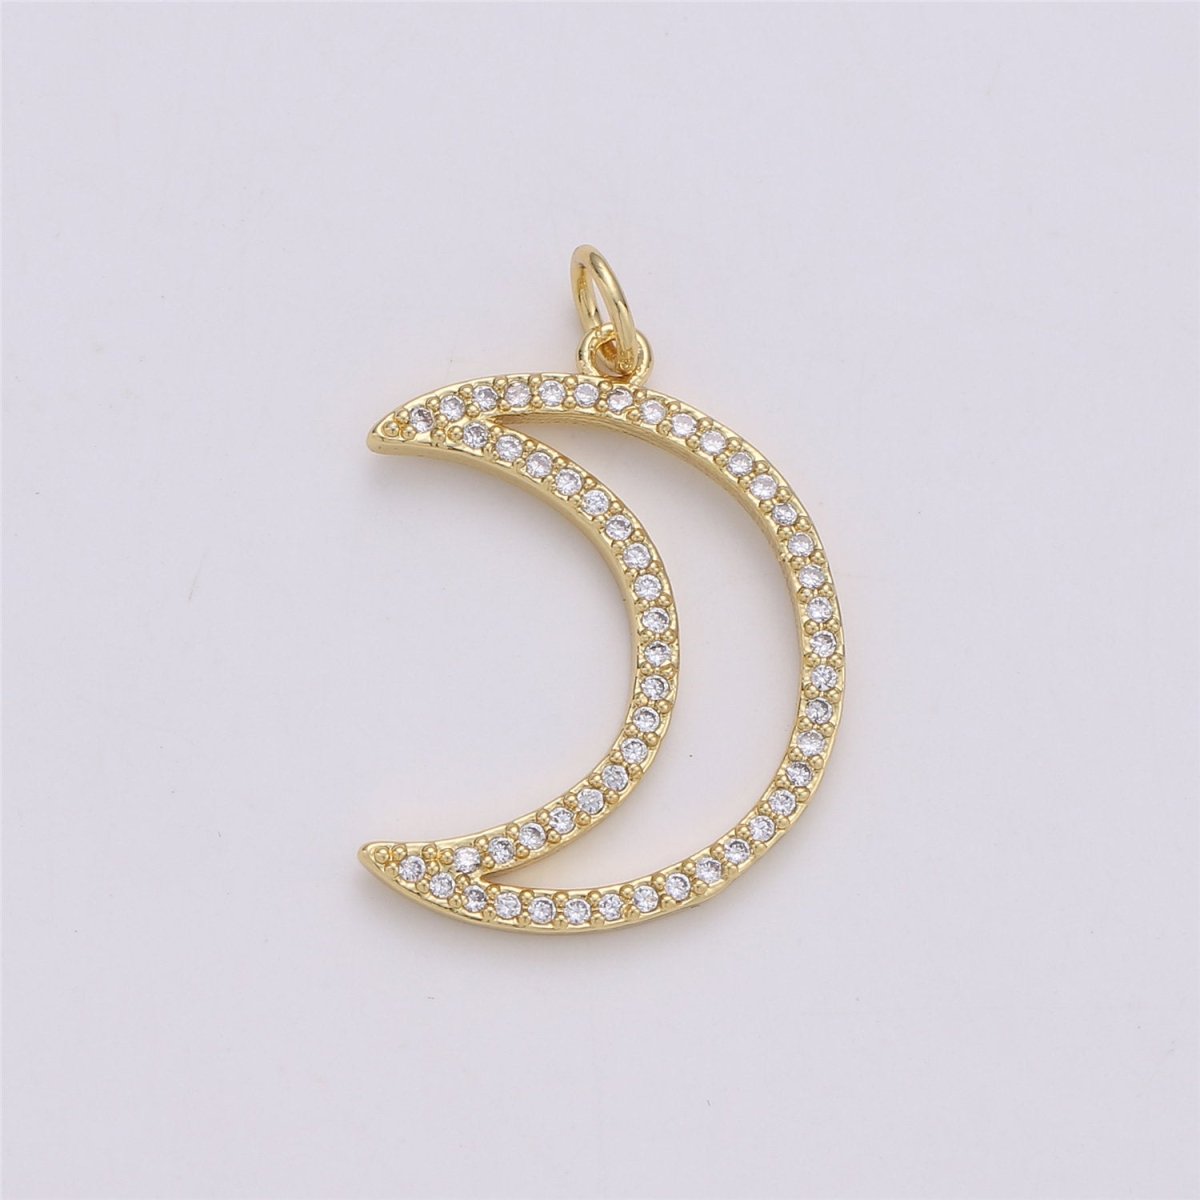 24K Gold Filled Dainty Cute modern Moon Charm with Micro Pave Cubic Zirconia CZ Stone for Celestial Necklace or Bracelet,C-873 - DLUXCA